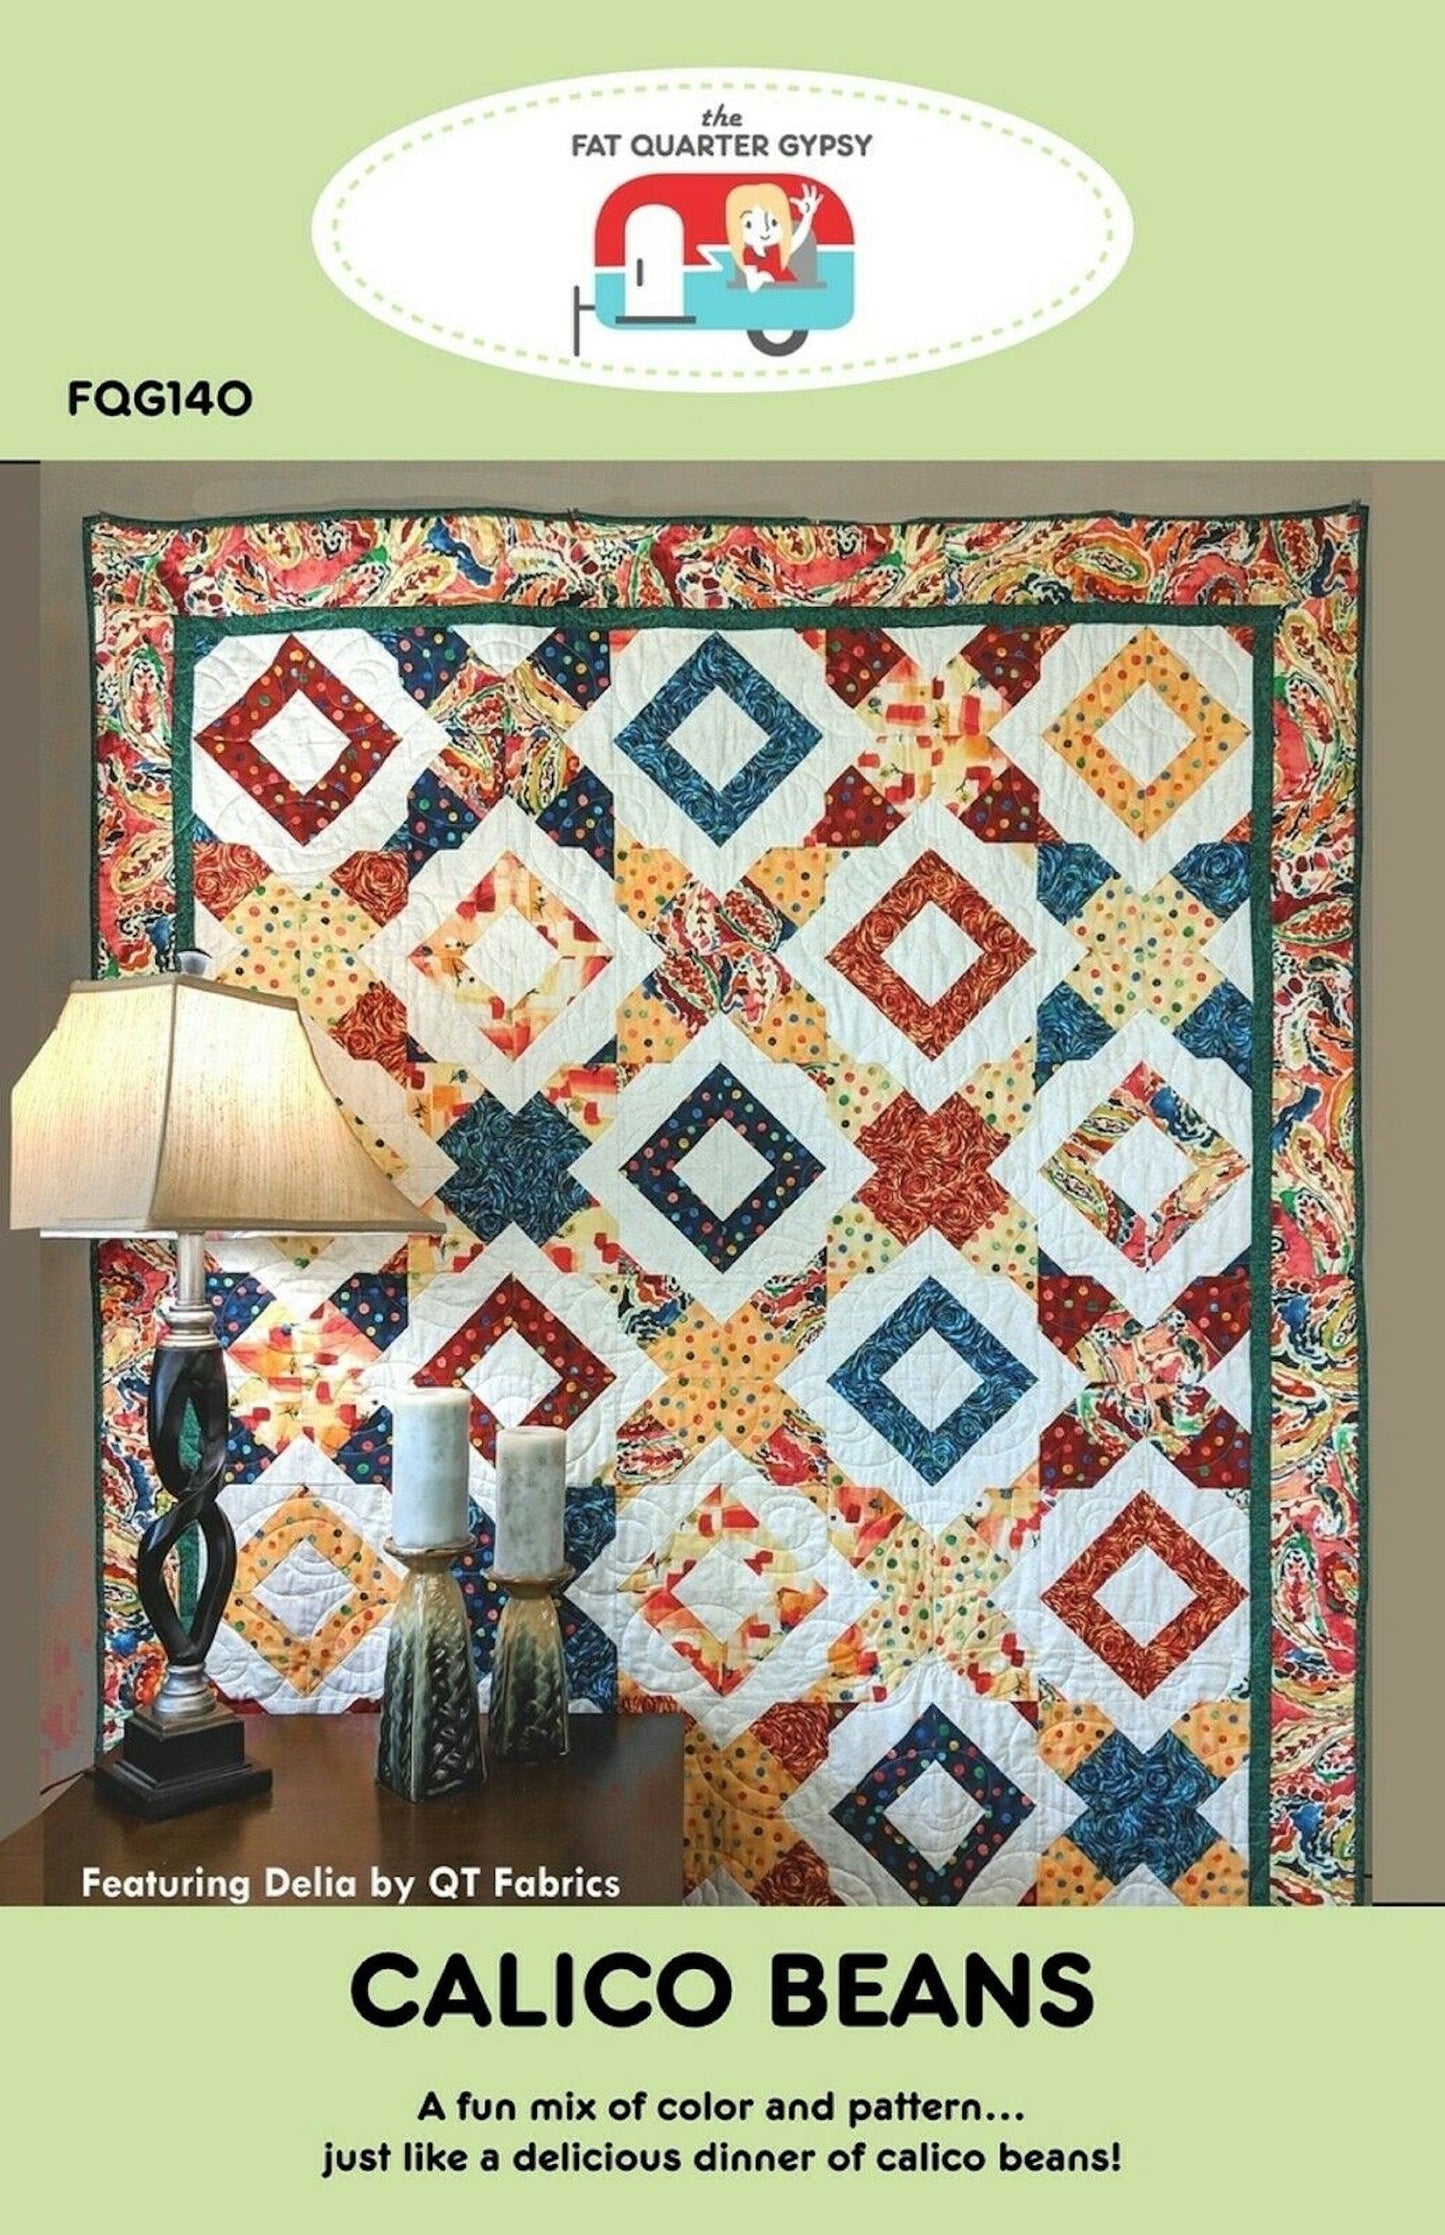 Calico Beans Quilt Pattern by Fat Quarter Gypsy